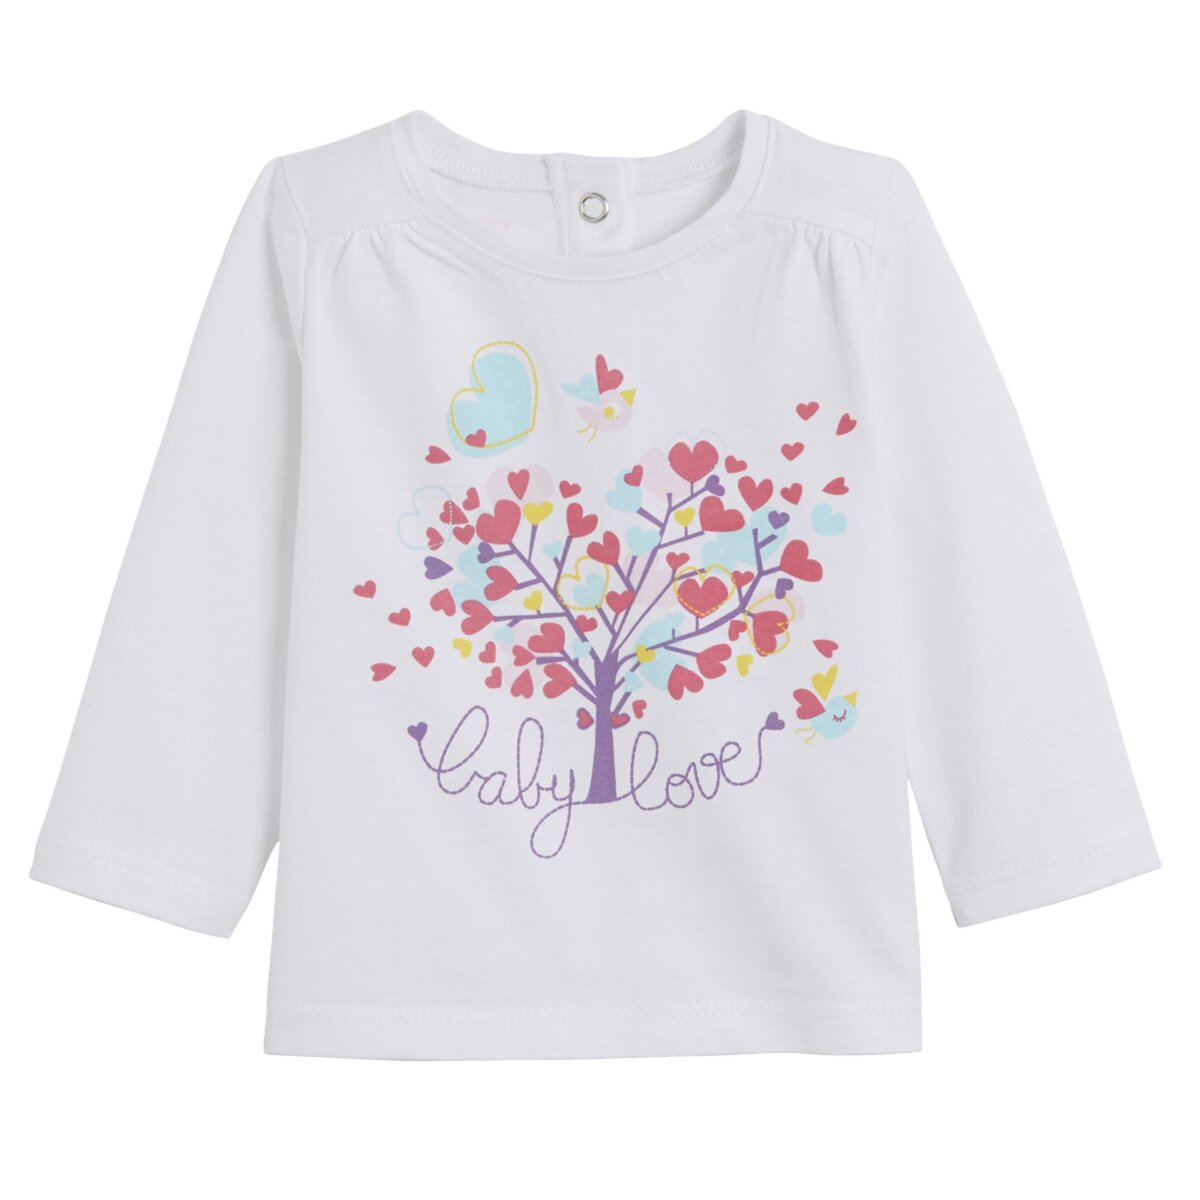 IN EXTENSO Tee-shirt manches longues bébé fille